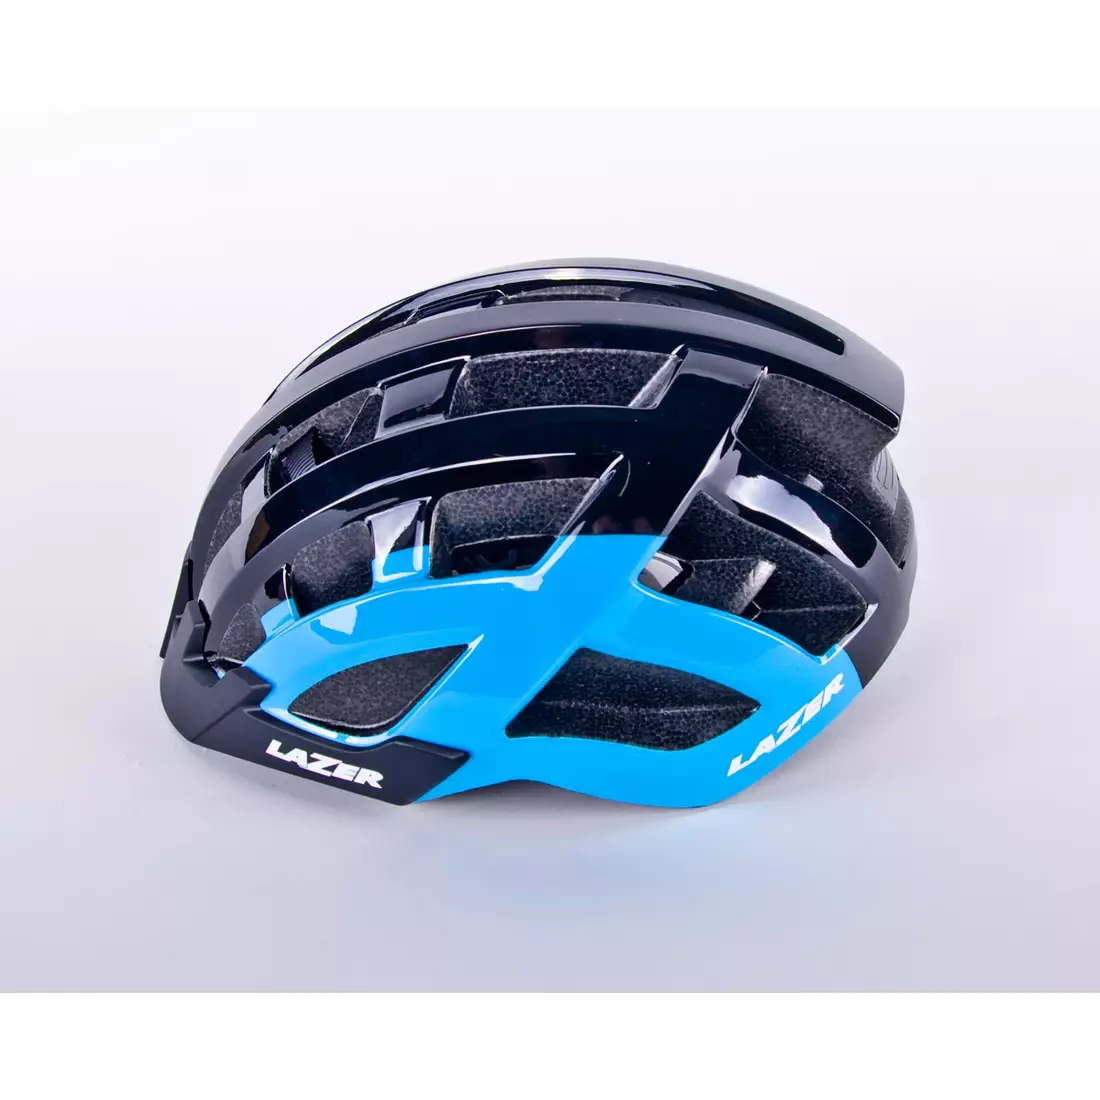 LAZER Compact DLX bicycle helmet LED insect net blue black glossy